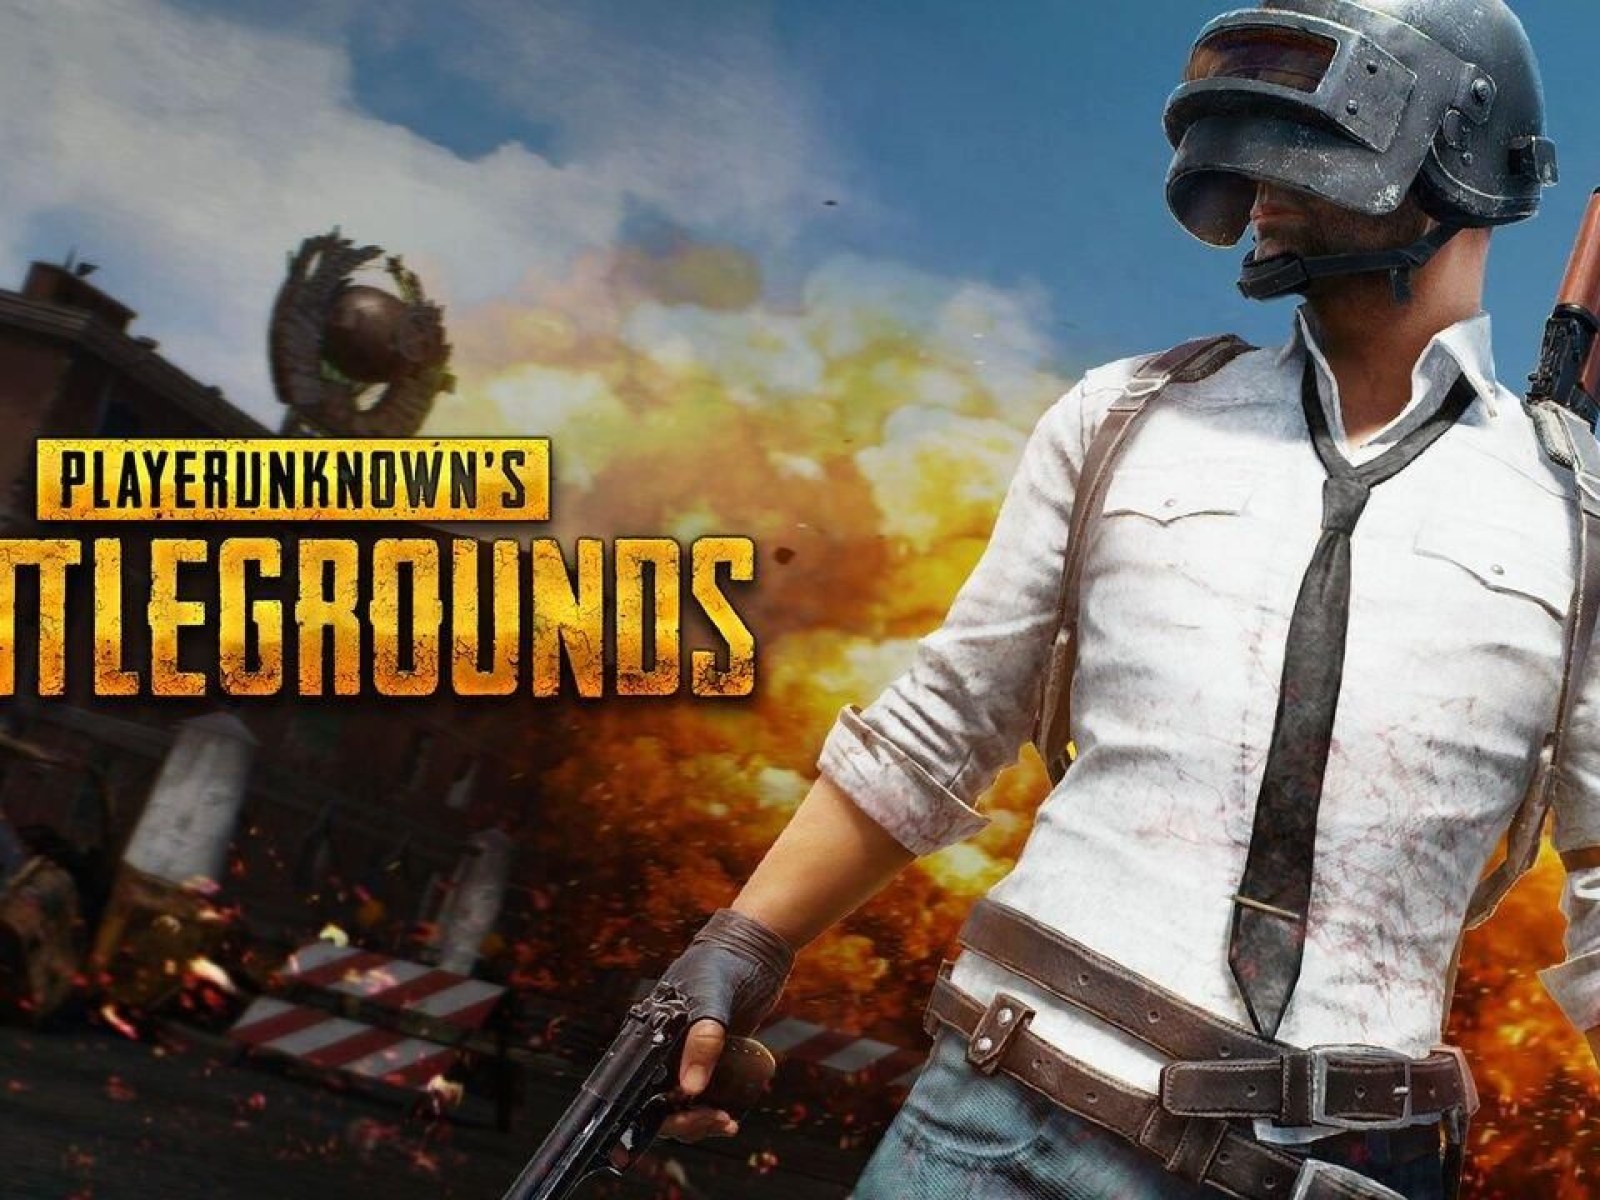 Pubg Mobile Ps4 Descargar - Is Pubg Free To Play On Ps4